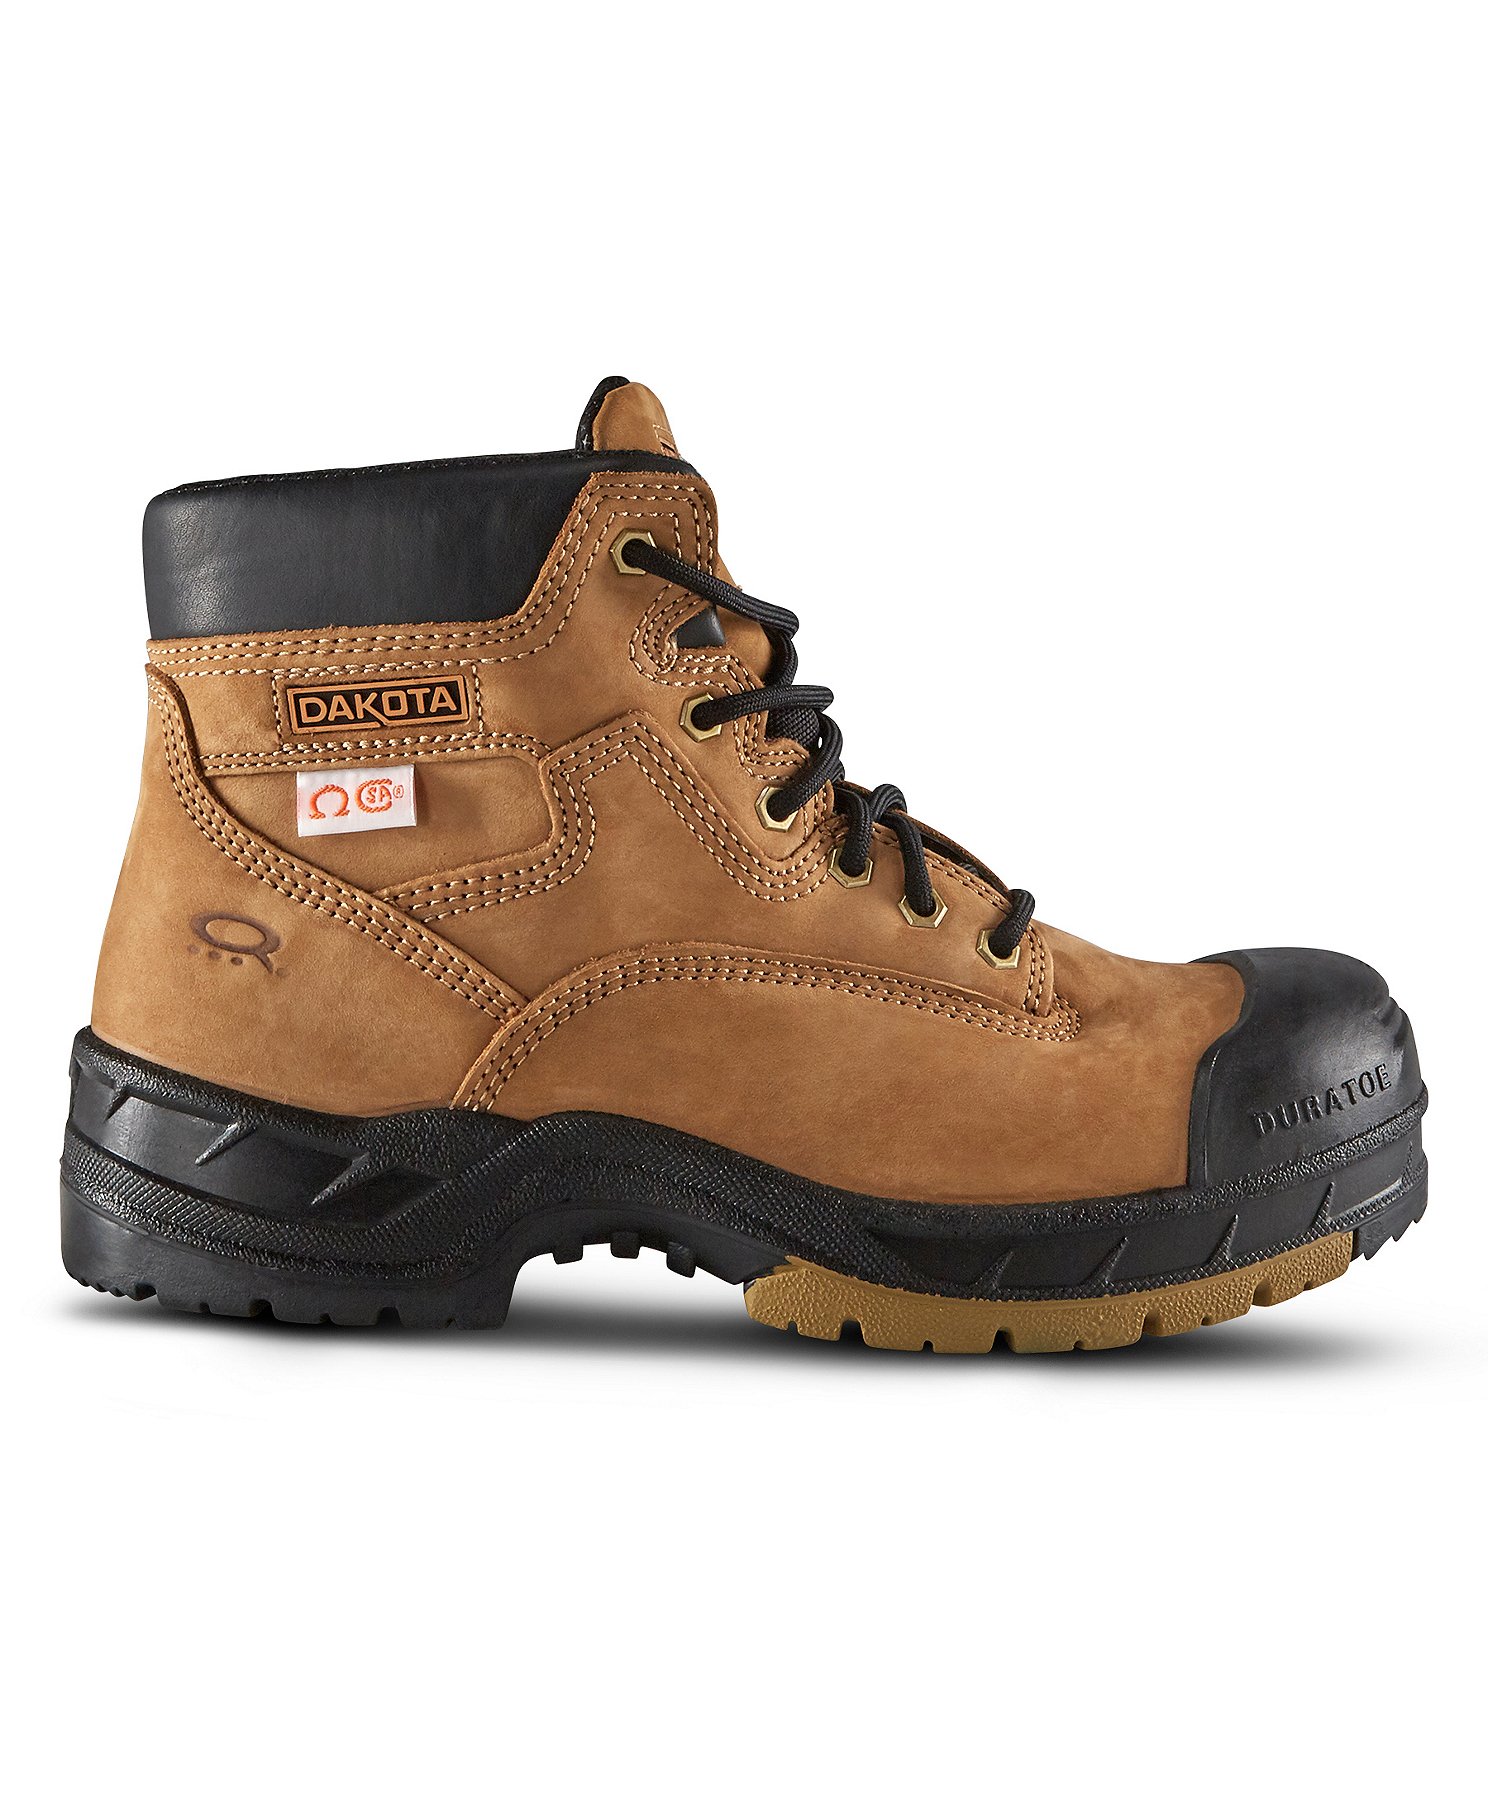 Most Comfortable Work Boots For Walking On Concrete COMFORT